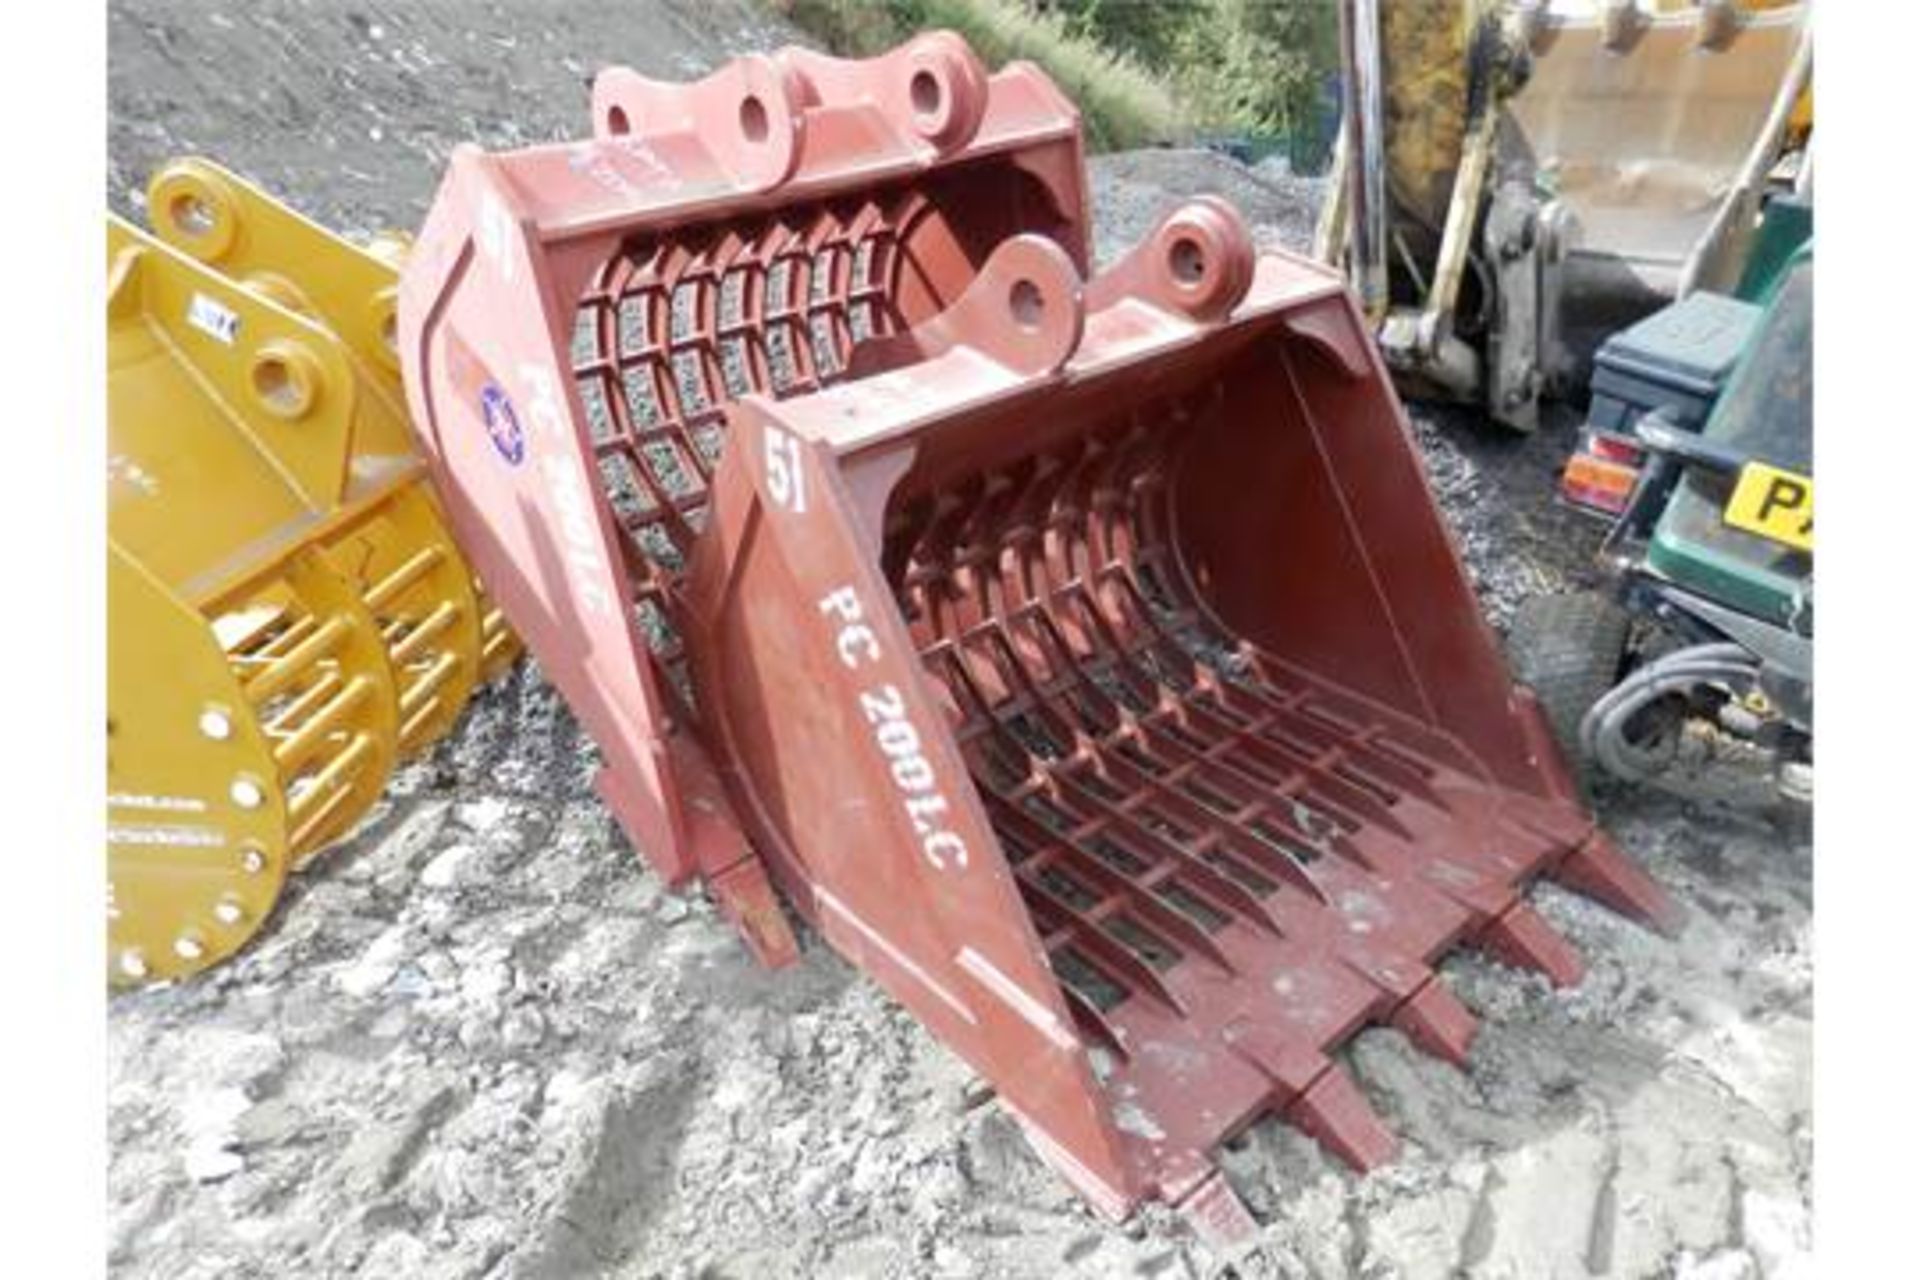 DS - 1 X RIDDLE BUCKET TO FIT KOMATSU DIGGER. NEW & UNUSED.   LISTING IS FOR 1 X RIDDLE BUCKET AS - Image 3 of 3